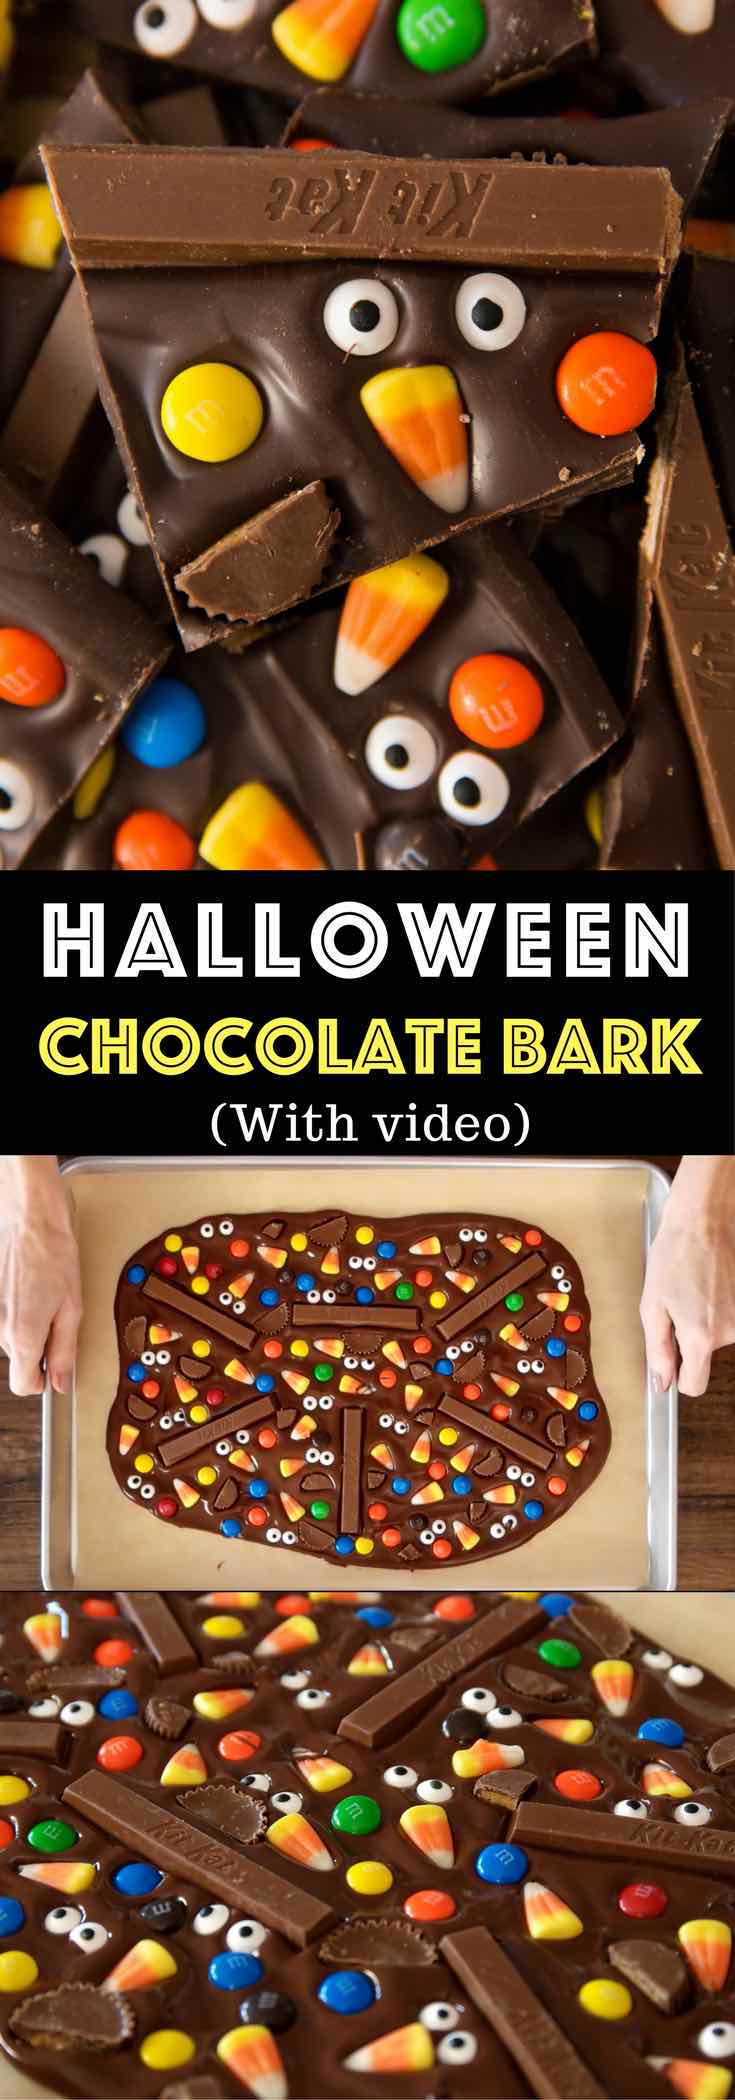 Fun and delicious Halloween Chocolate Bark is one of the easiest Halloween recipes. Melt chocolate and add your favorite candy such as Kit Kat, M&Ms, Peanut Butter Cups and candy corns. It makes a perfect party treat. Fun recipe to make with kids. Dessert, Party Food. Vegetarian. Fun and yummy Halloween recipe. Video recipe. | Tipbuzz.com 